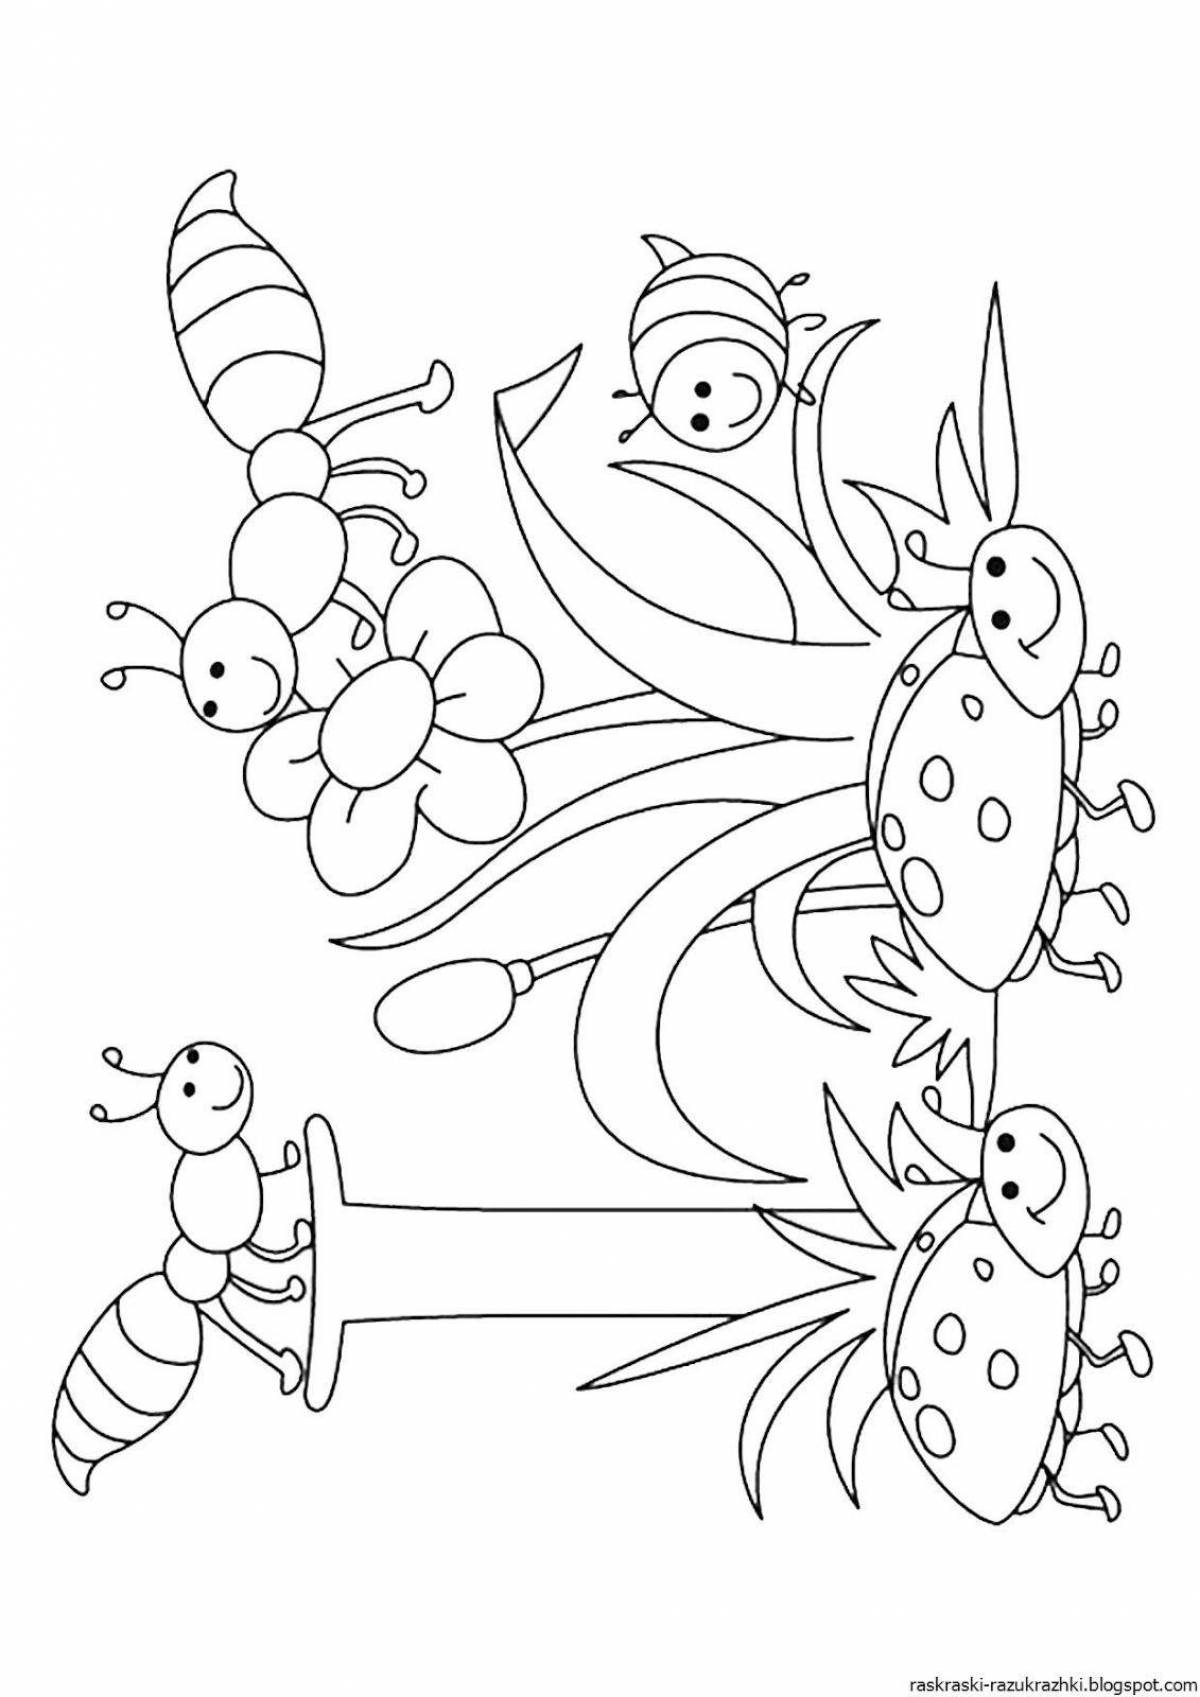 Colorful insects coloring pages for kids